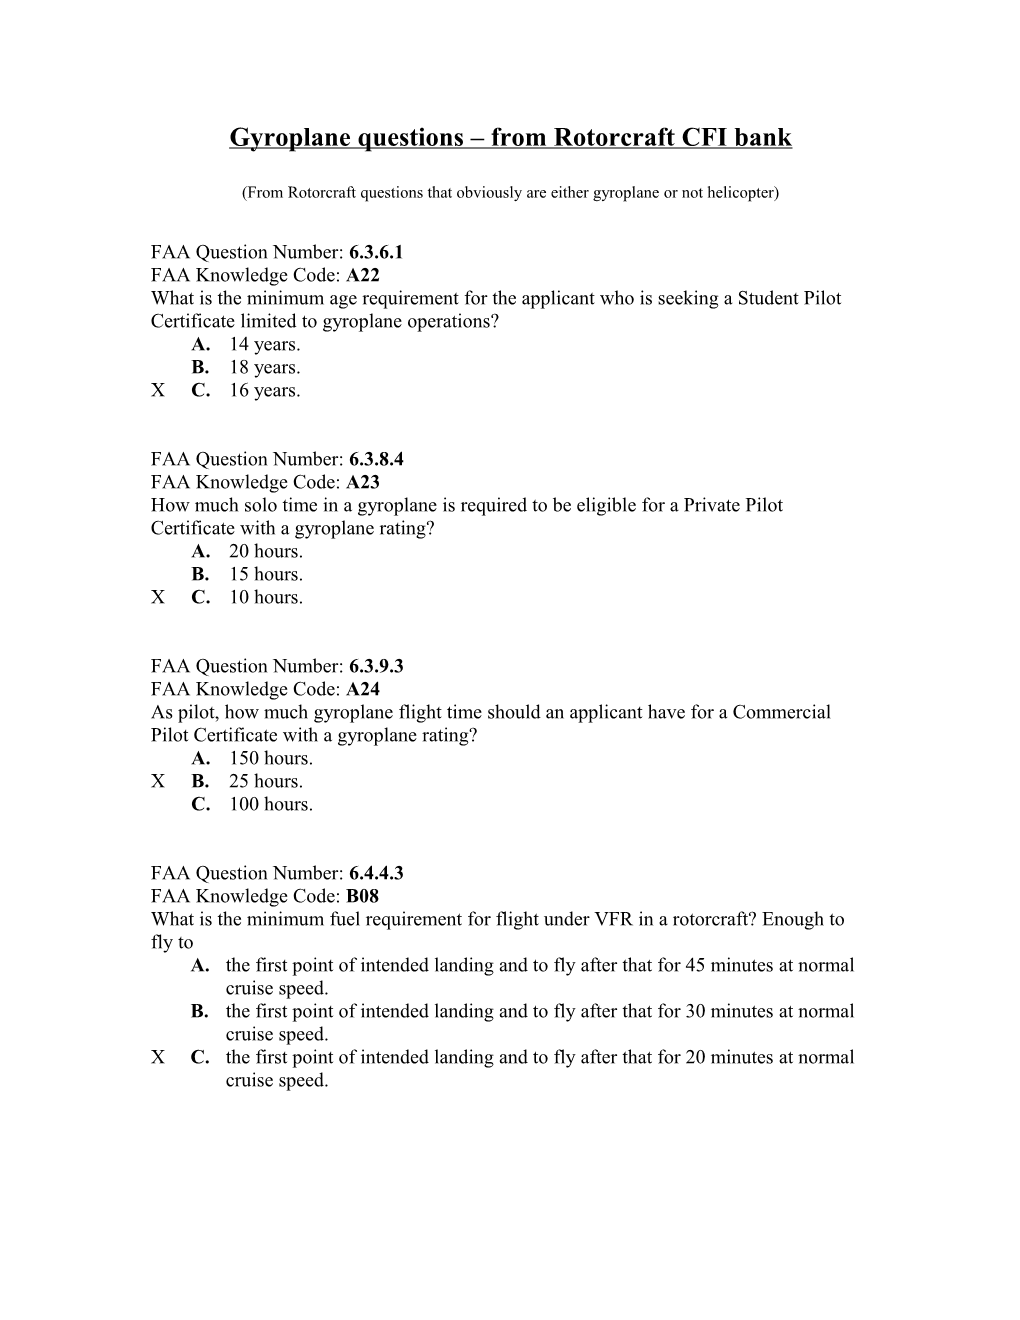 FAA Question Number: 6